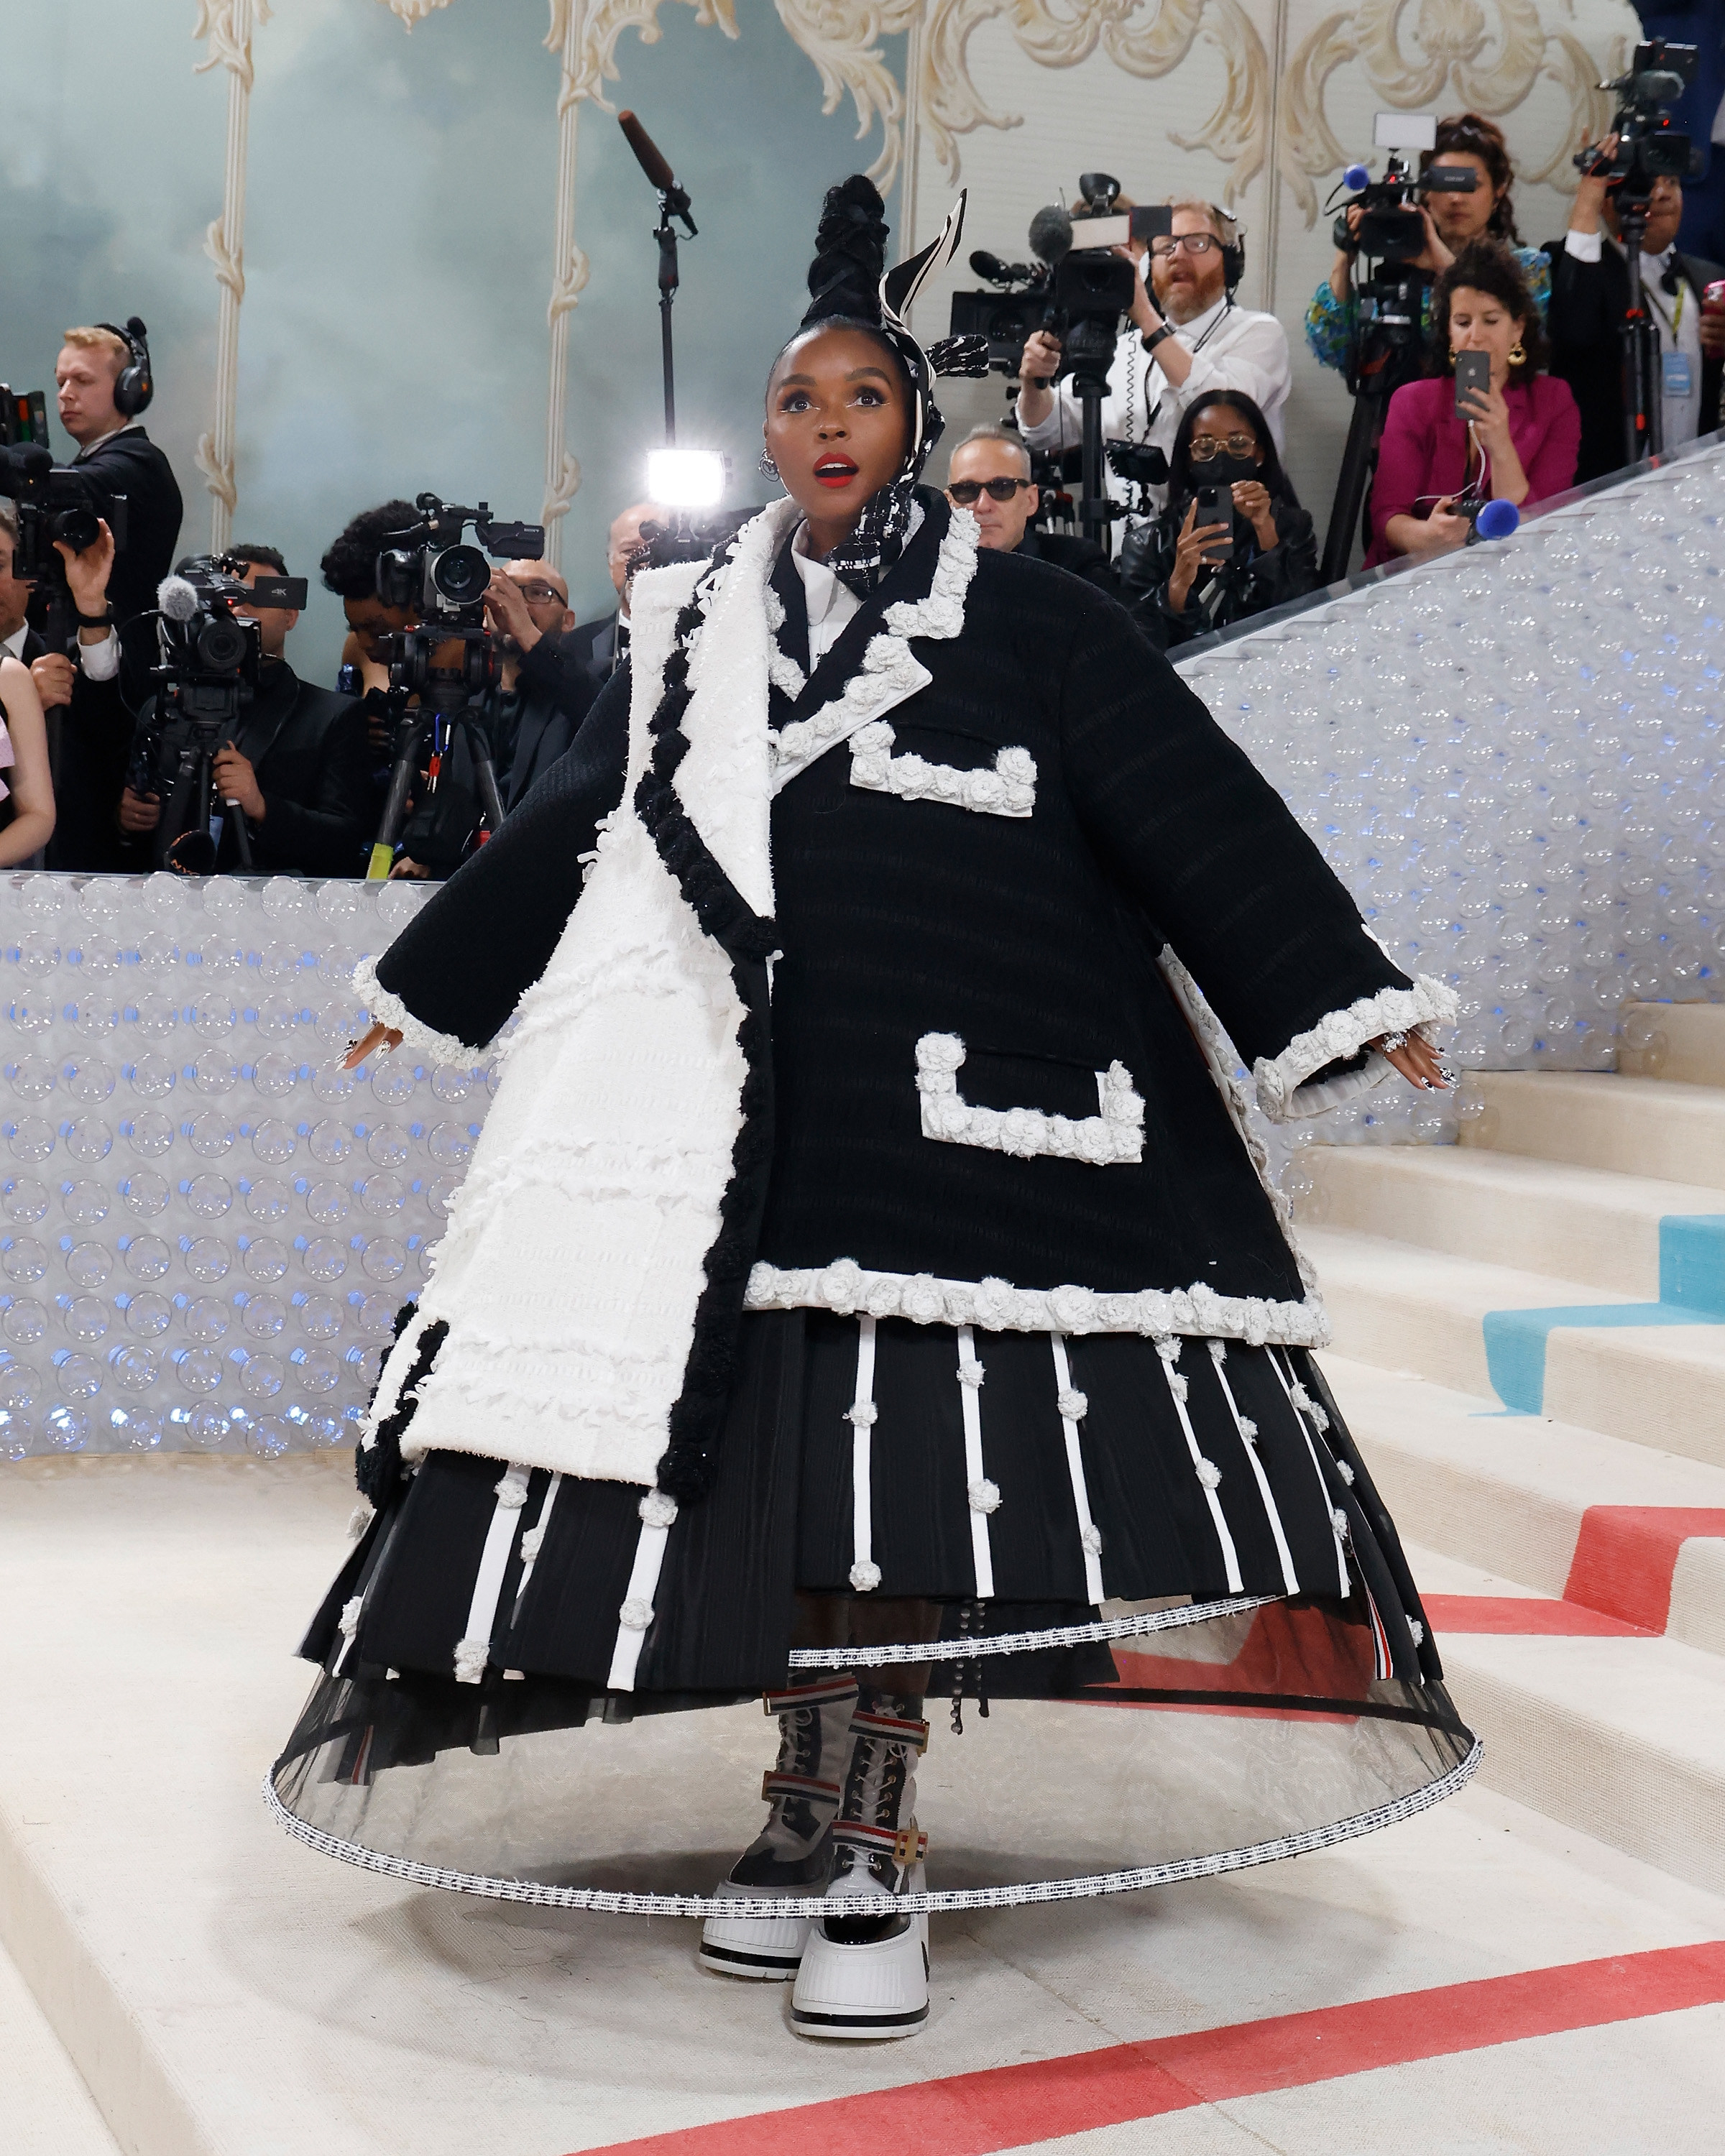 Janelle Monáe at the Met Gala: